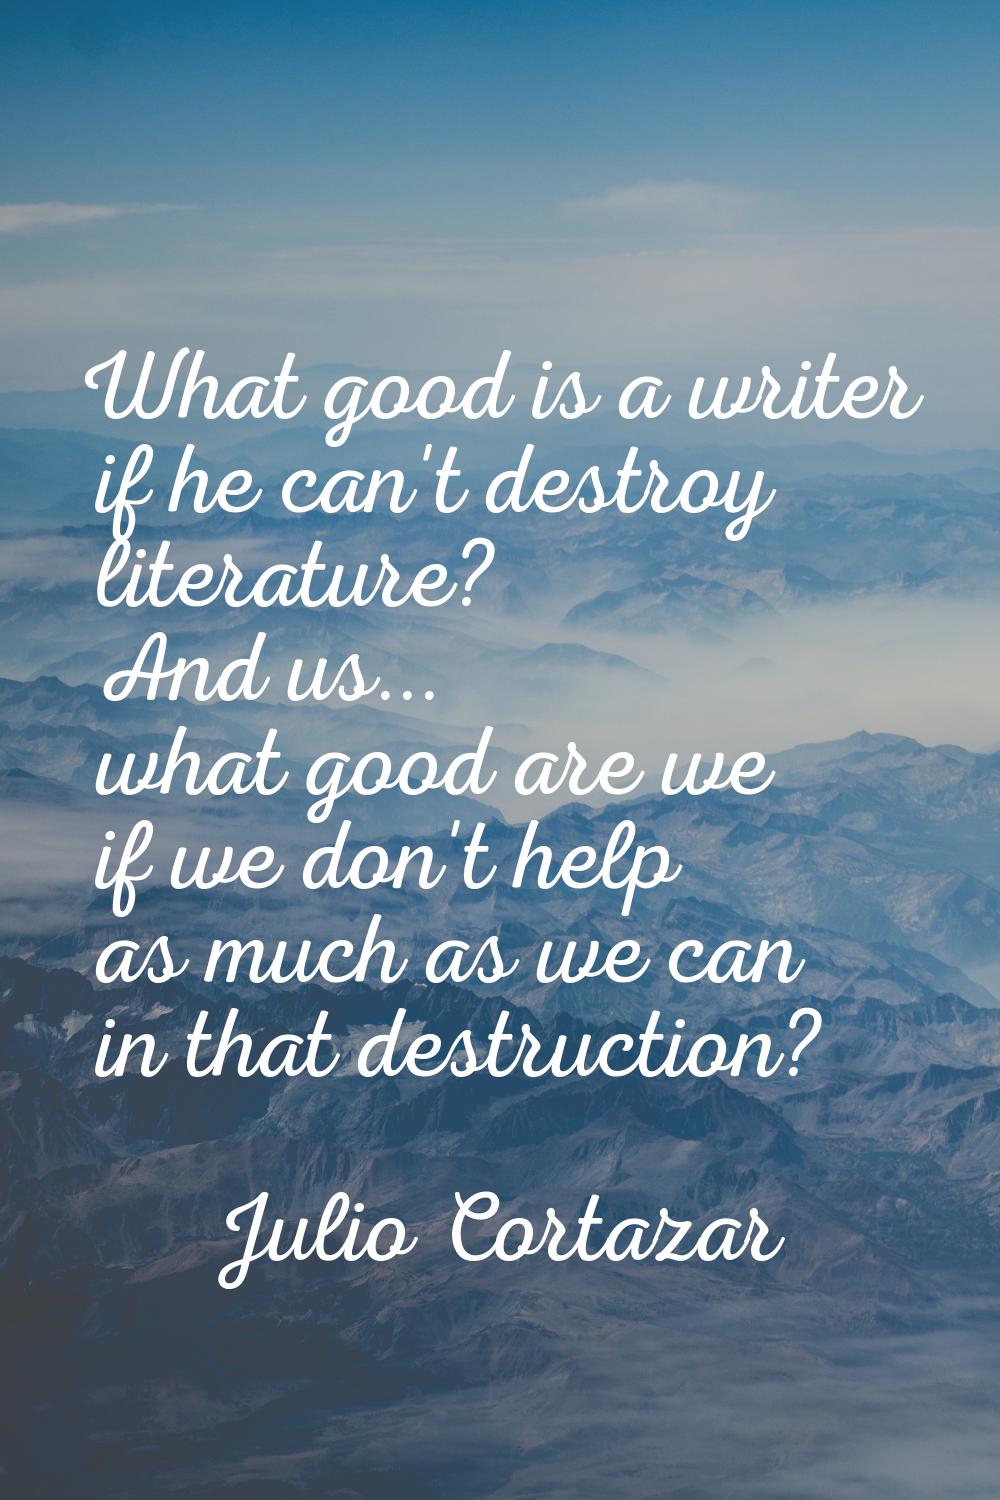 What good is a writer if he can't destroy literature? And us... what good are we if we don't help a